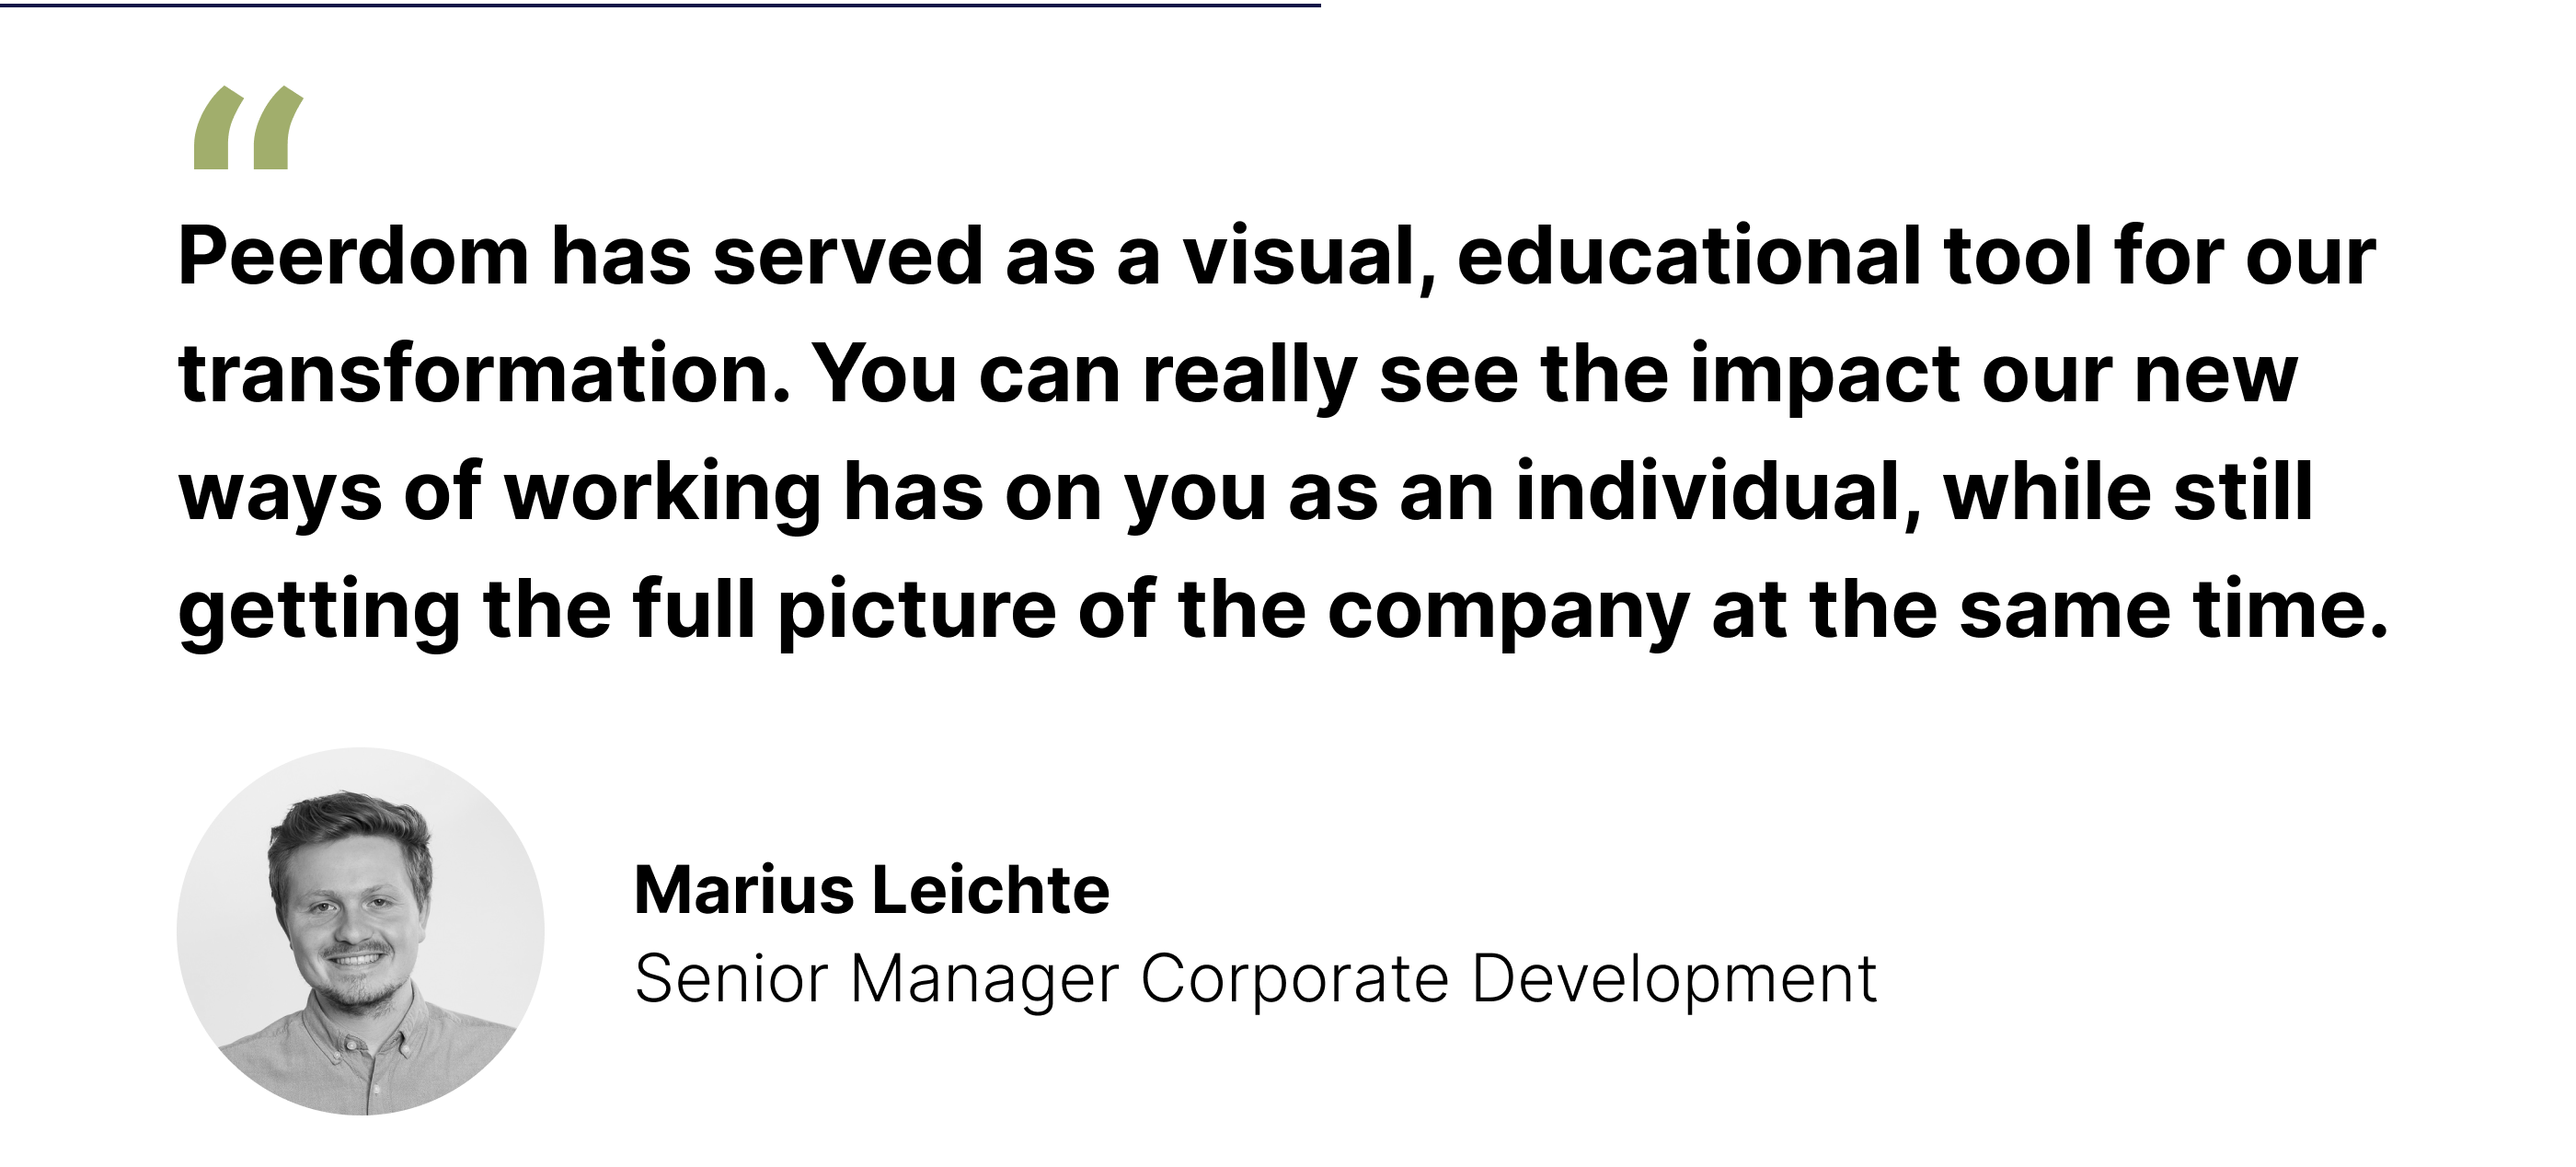 A quote by Marius Leichte. Peerdom has served as a visual, educational tool for our transformation. You can really see the impact our new ways of working has on you as an individual, while still getting the full picture of the company at the same time.